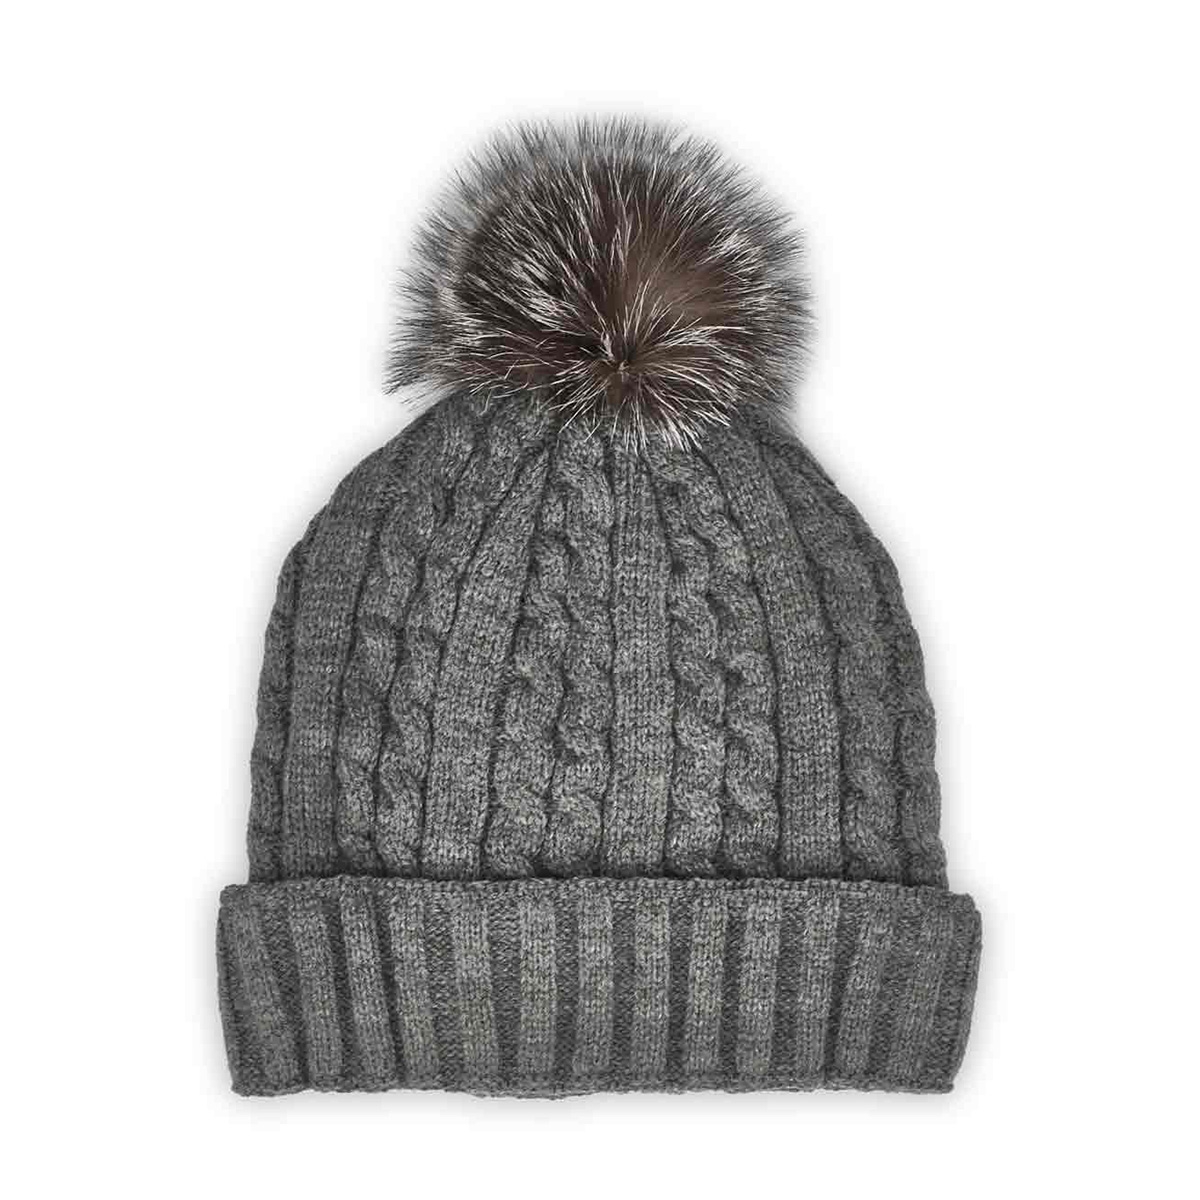 SoftMoc Women's Cable Stitch Hat with Fur Pom | SoftMoc.com